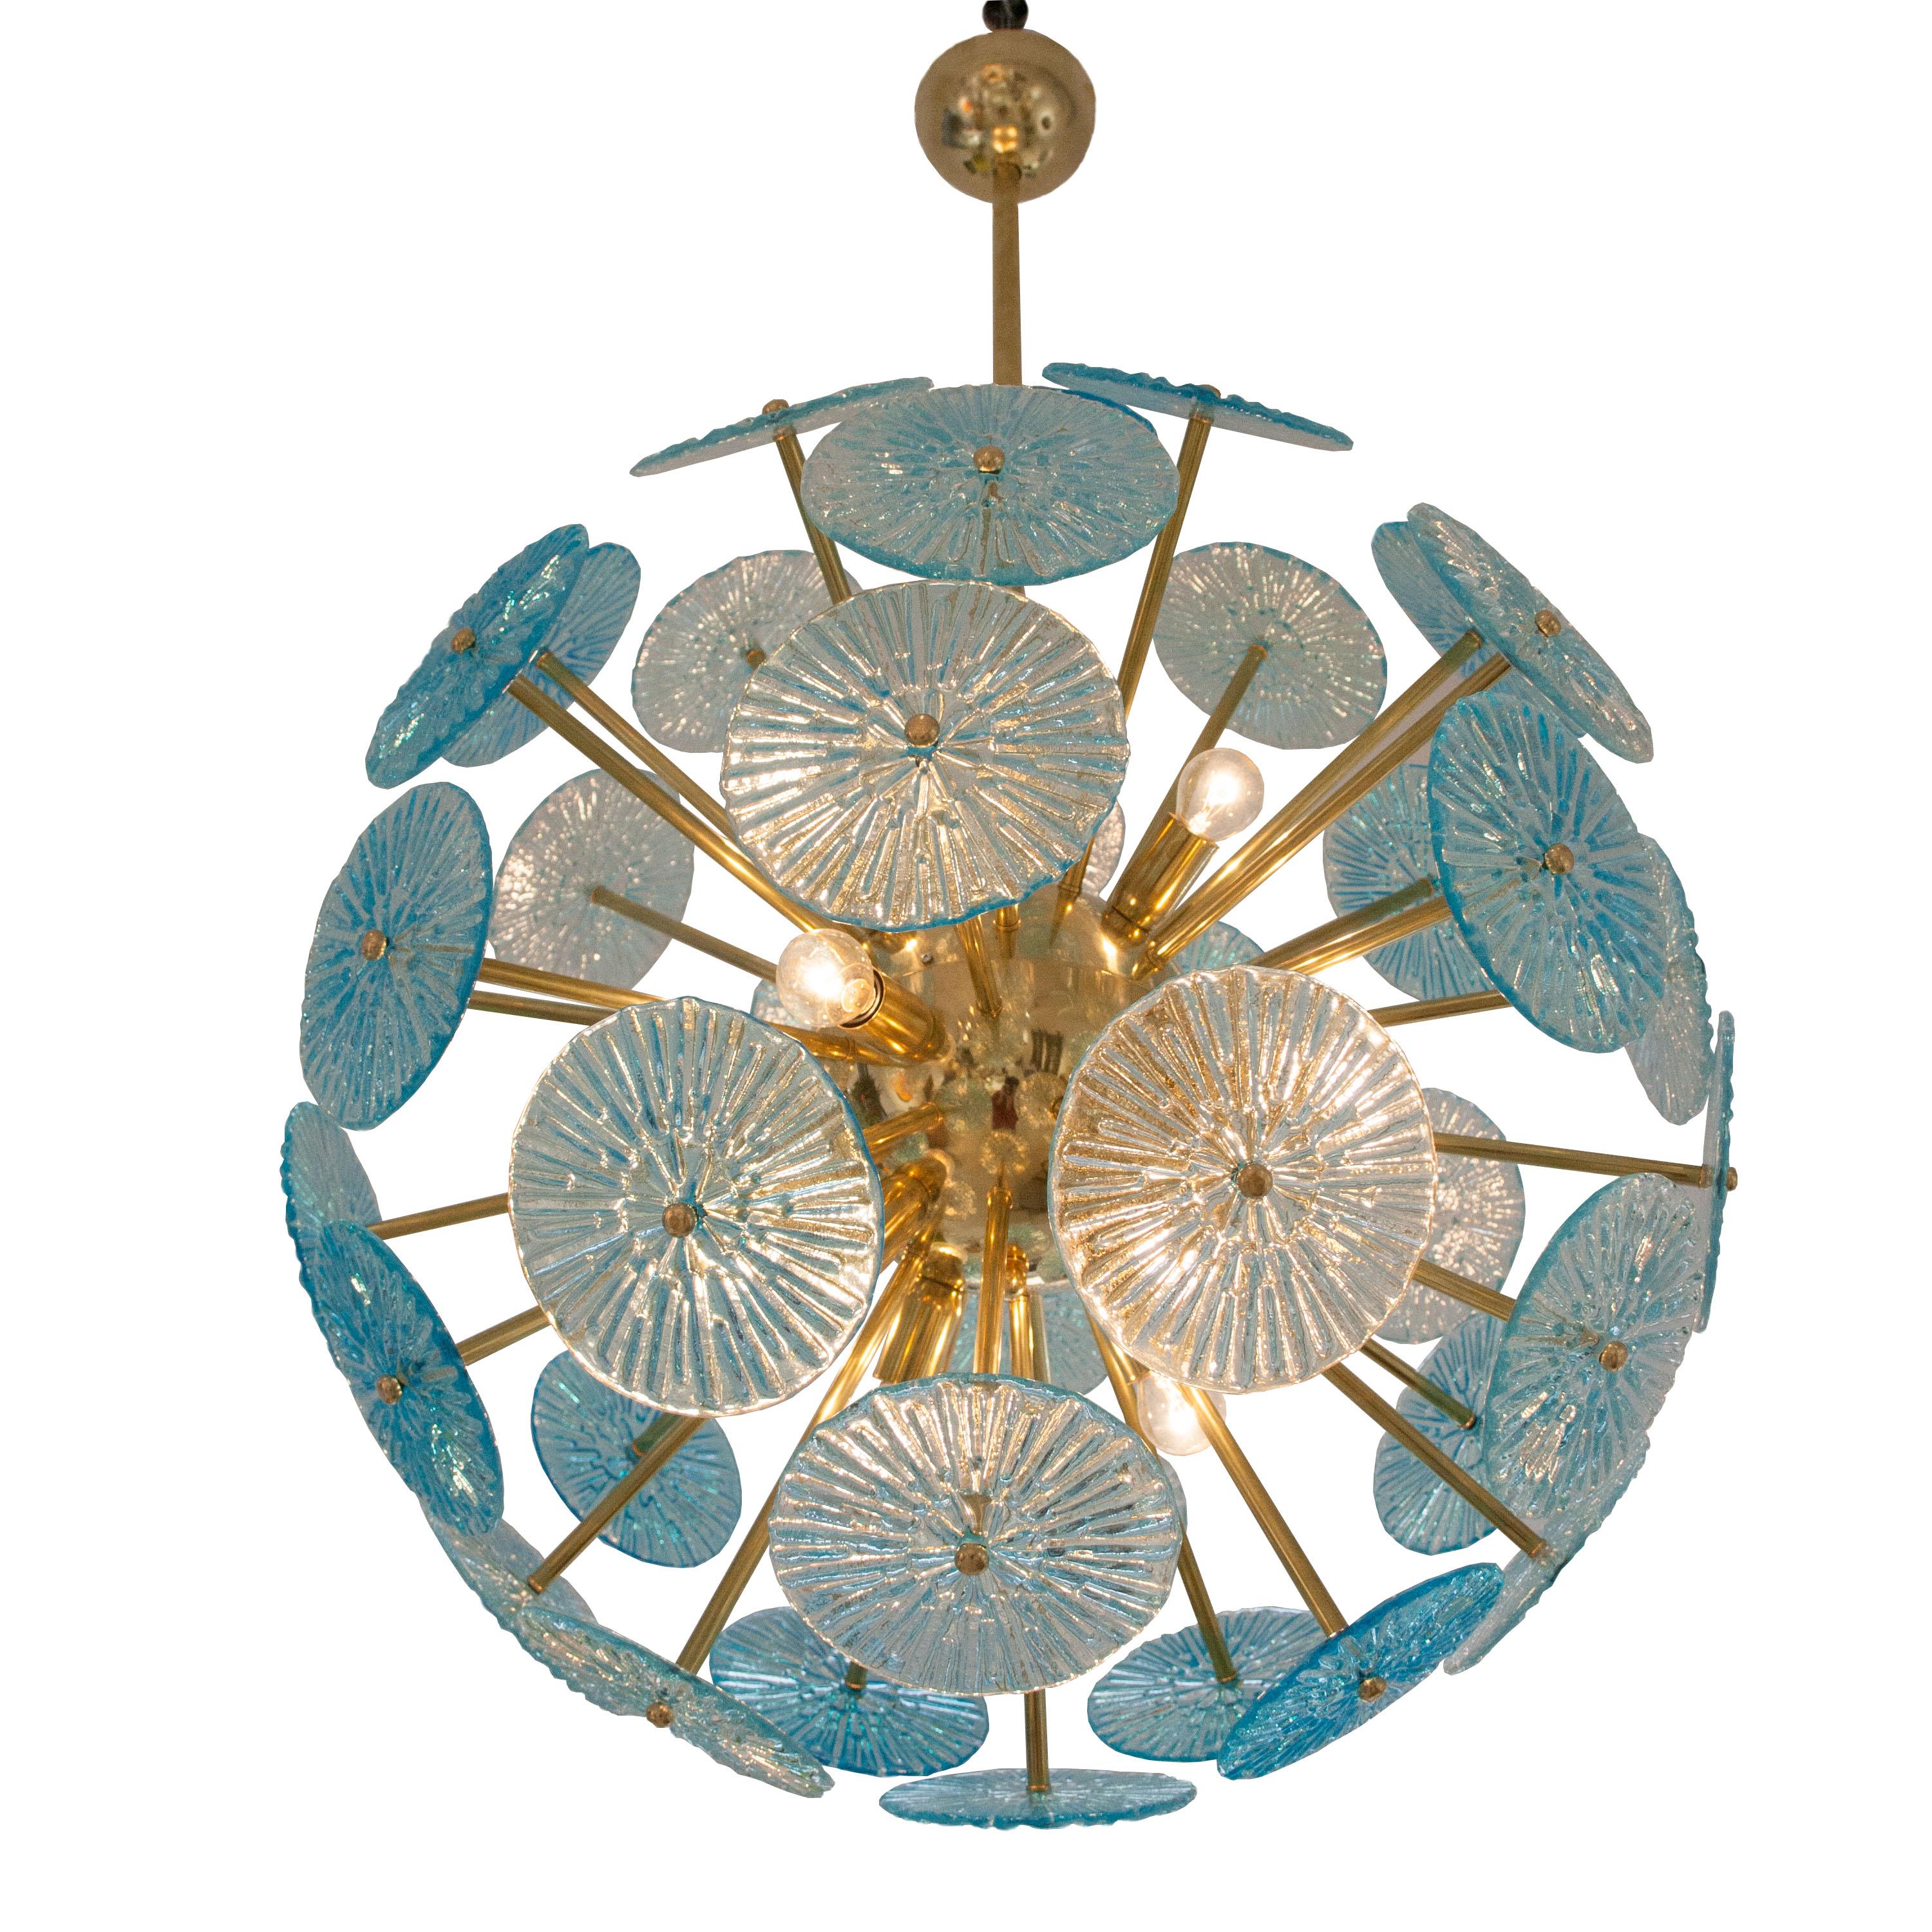 Mid-century style ceiling lamp made of reused Venini blue Murano glass pieces from the 1970's attached to a new brass structure with 12 light points.